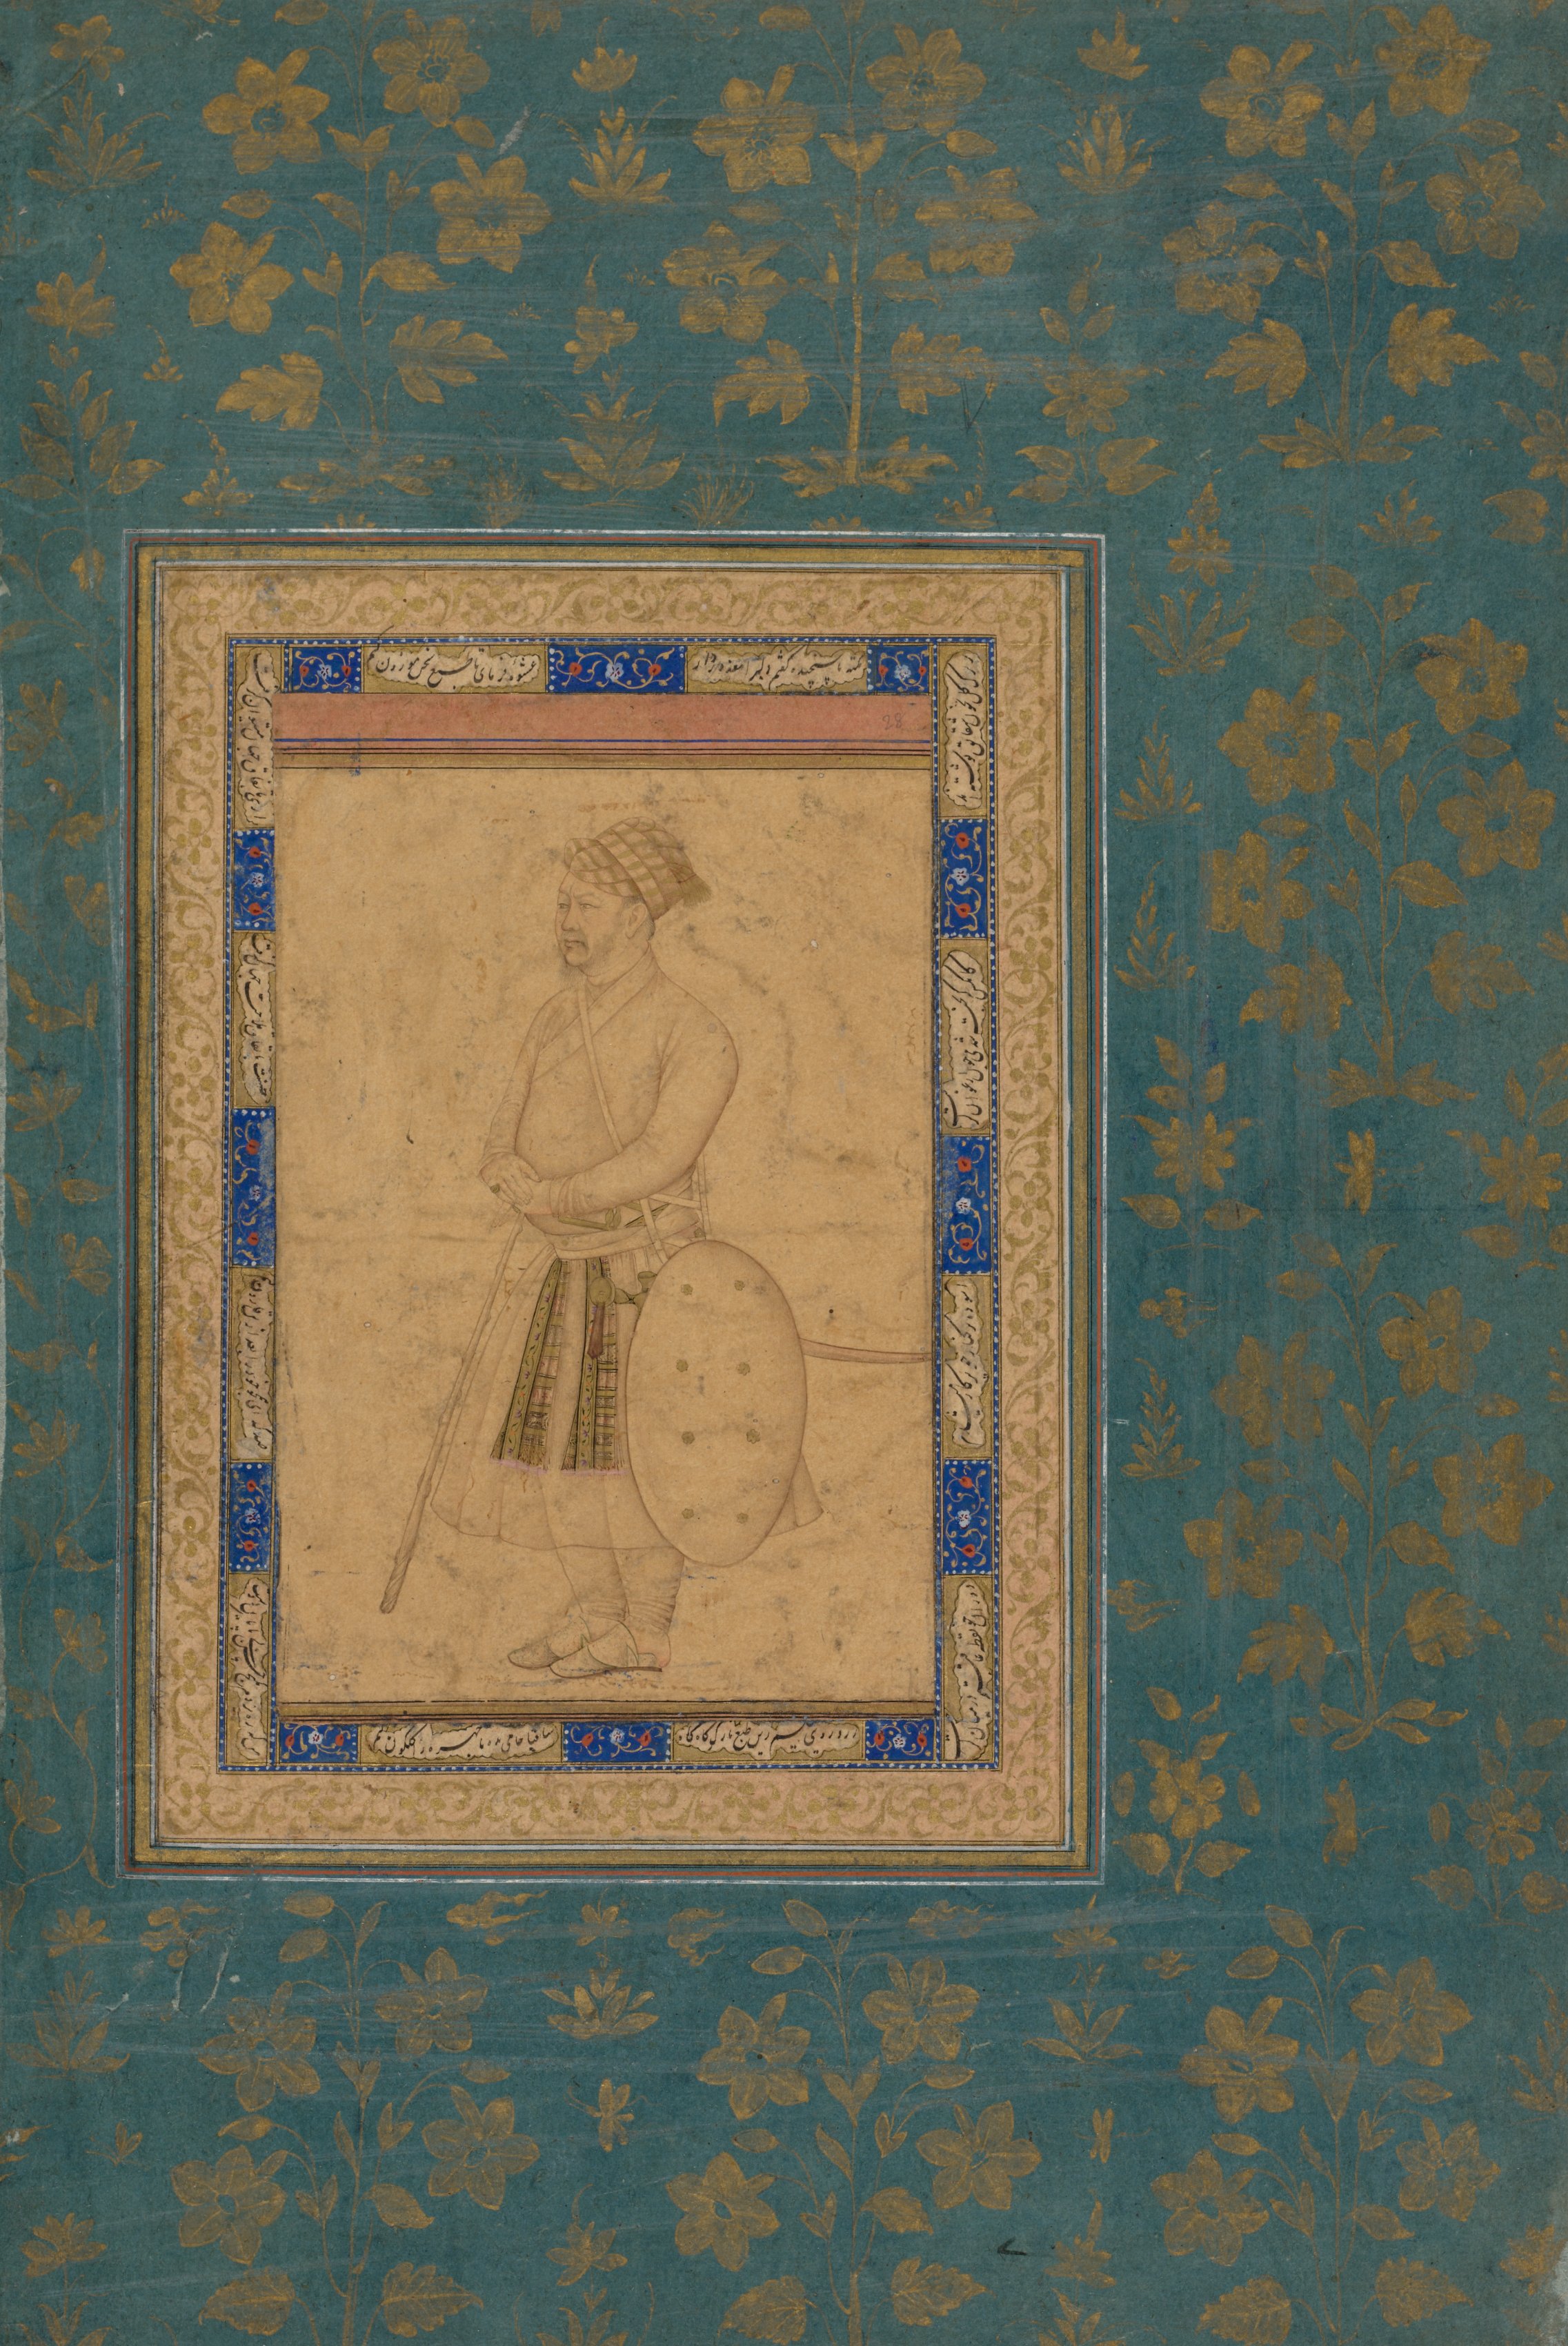 Portrait of an Unidentified Noble from Shah Jahan's Court